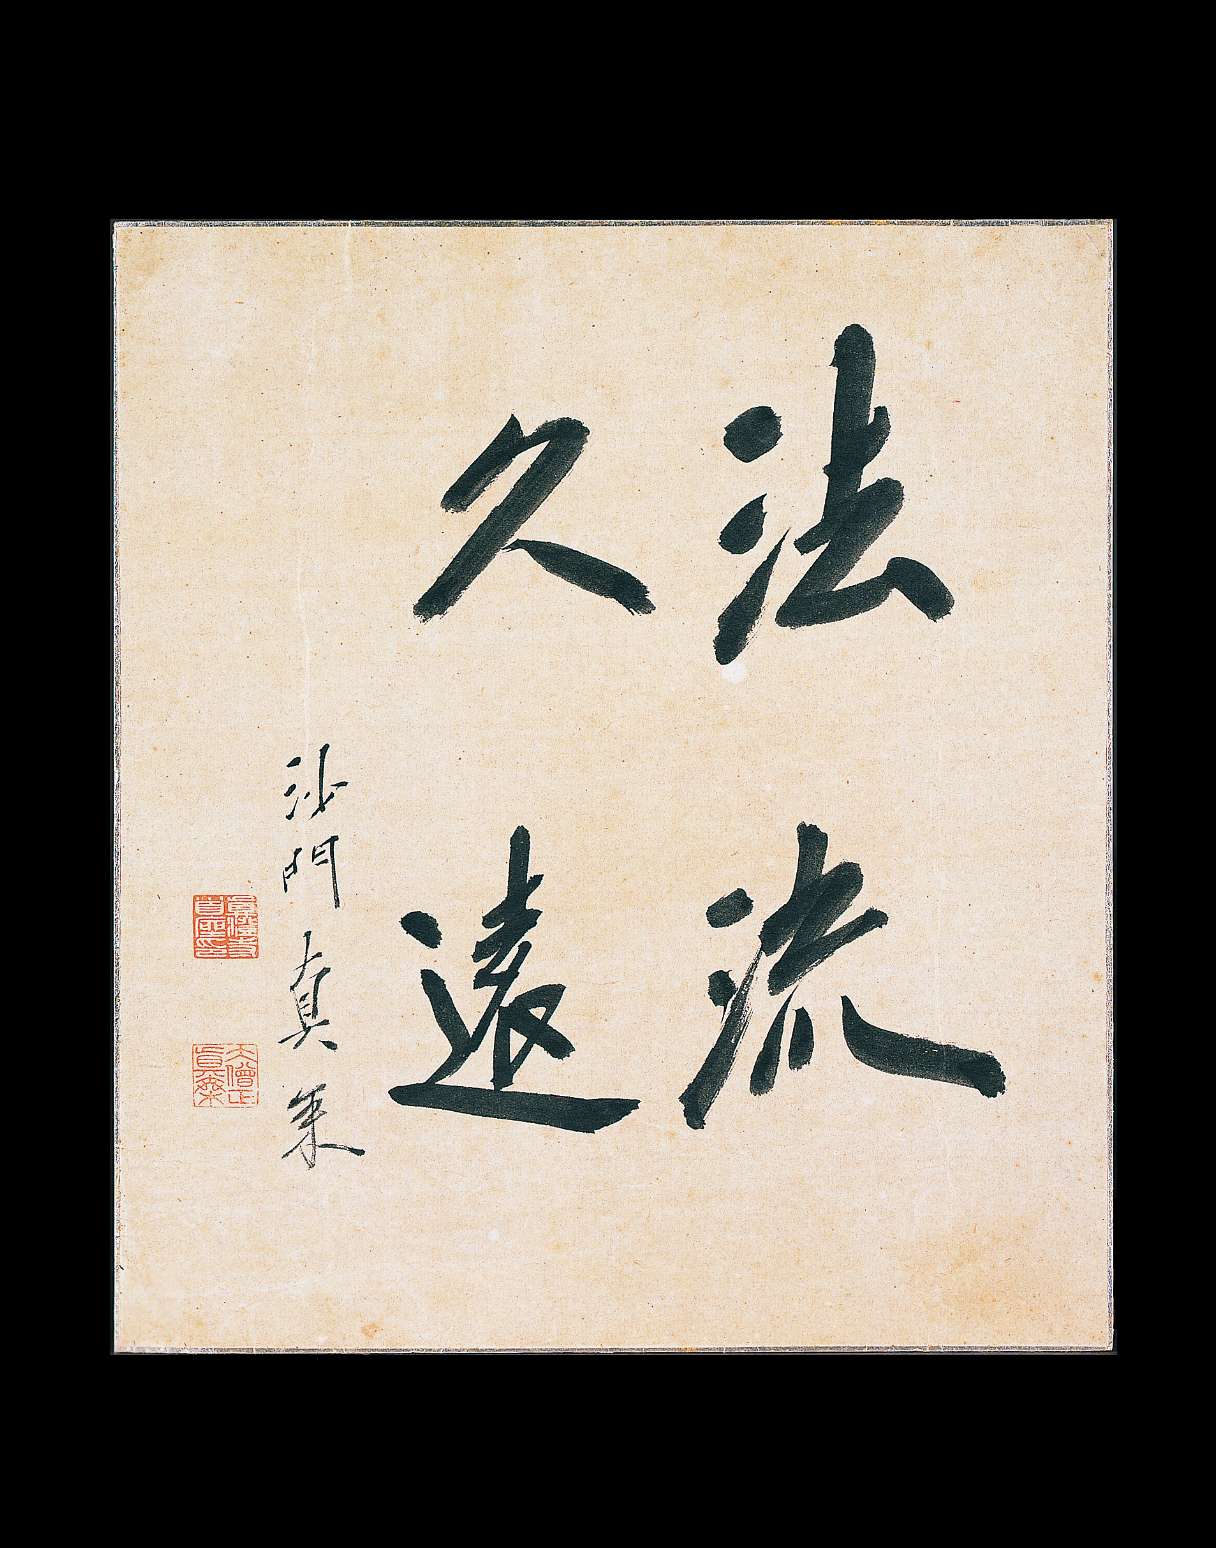 Four large Japanese calligraphy characters are written with brush on a squat, rectangular sheet of paper; to the left another smaller line of calligraphy is written with two stamp impressions in red.